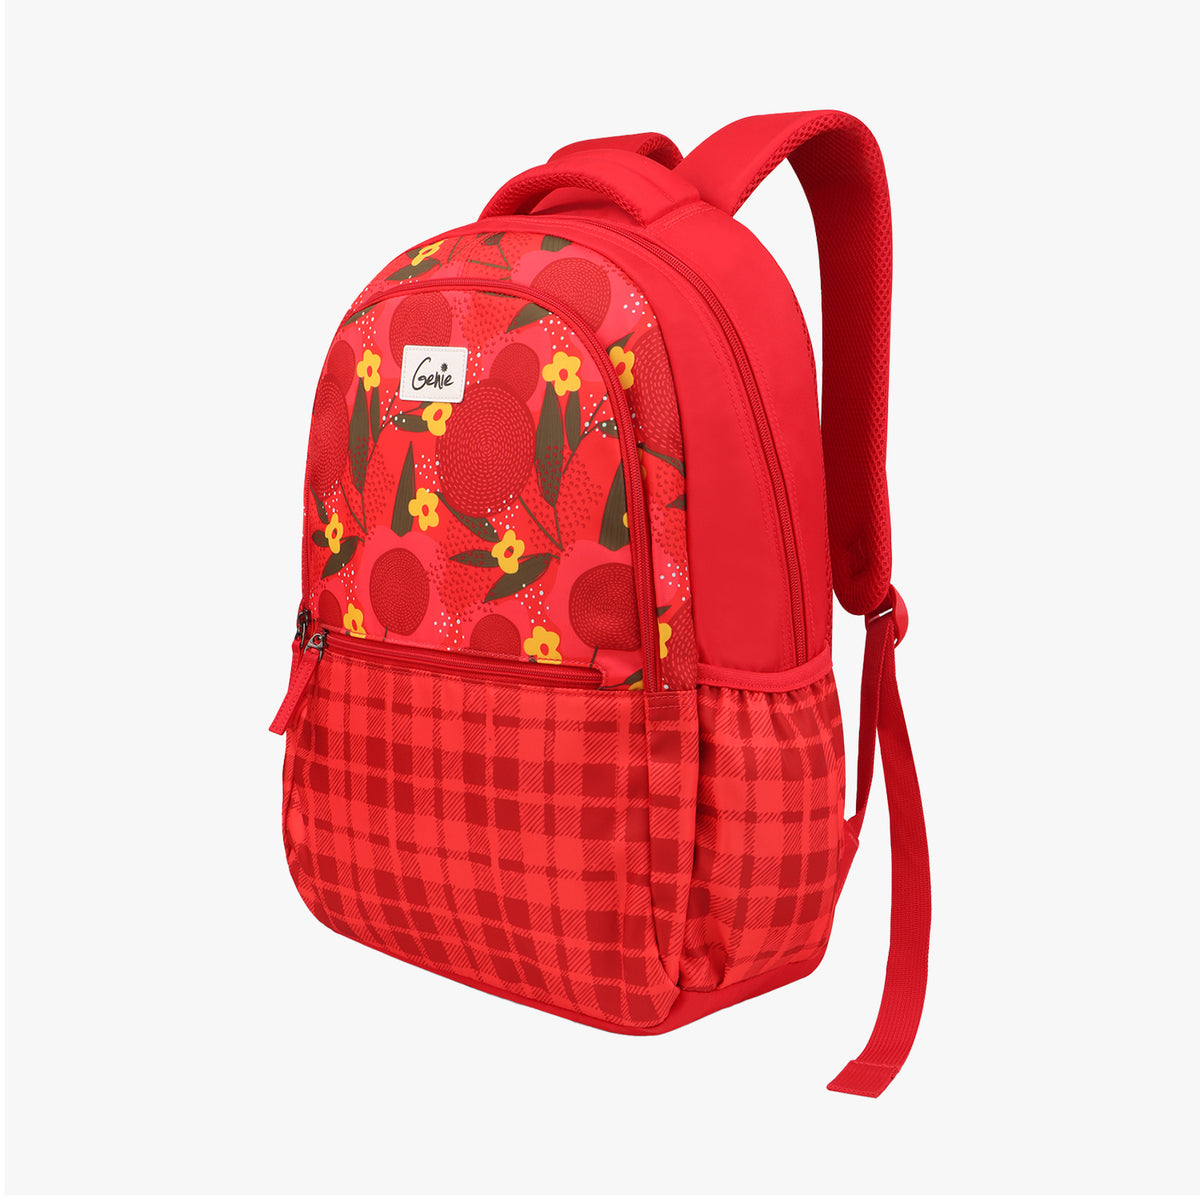 Chekmex Small School Backpack - Red